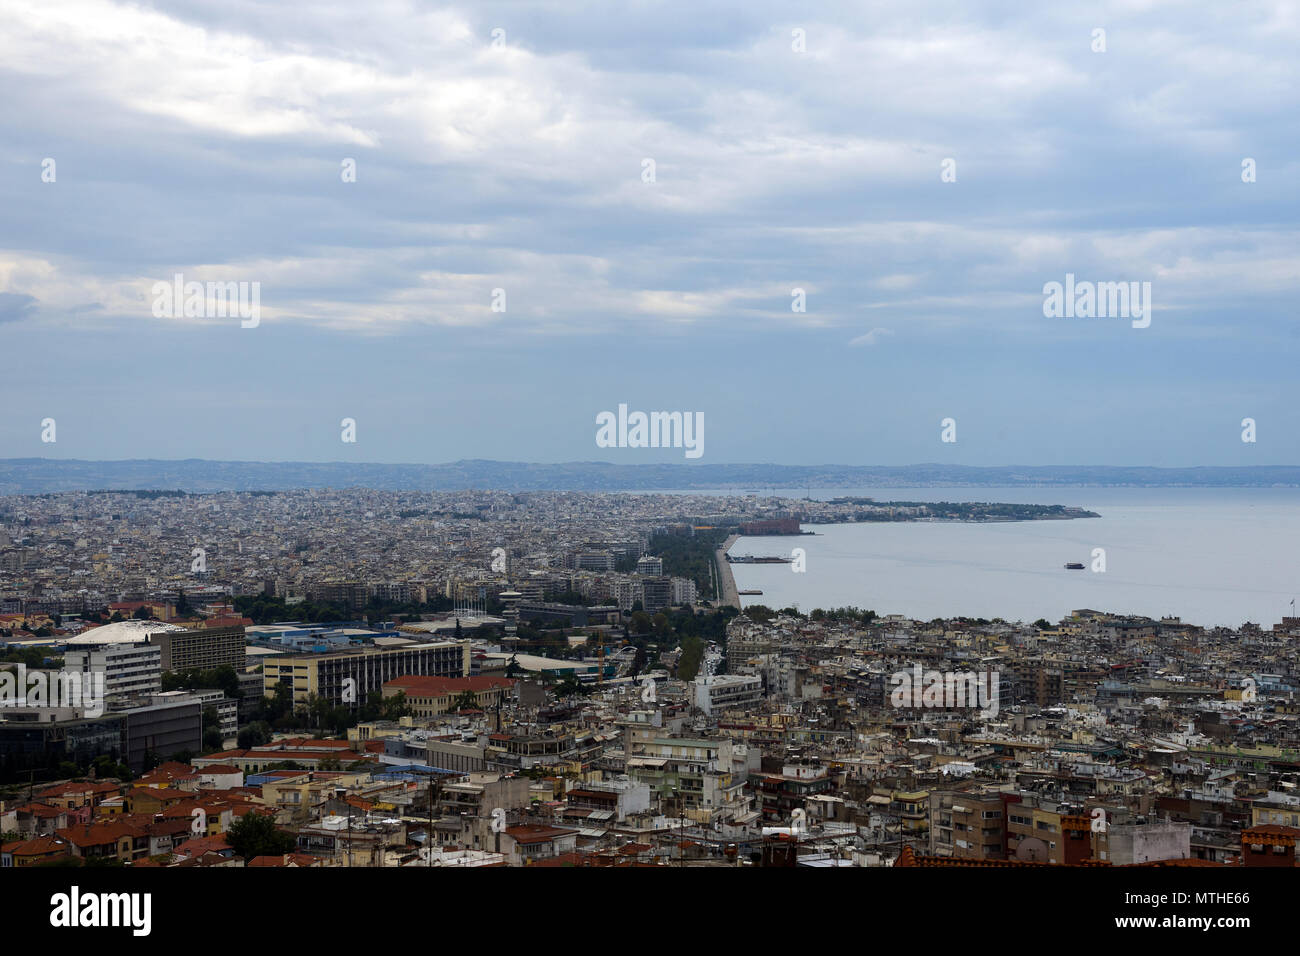 Thessaloniki, Greece, 09/29/2017: view of the city of Thessaloniki from the Ano Poli district Stock Photo